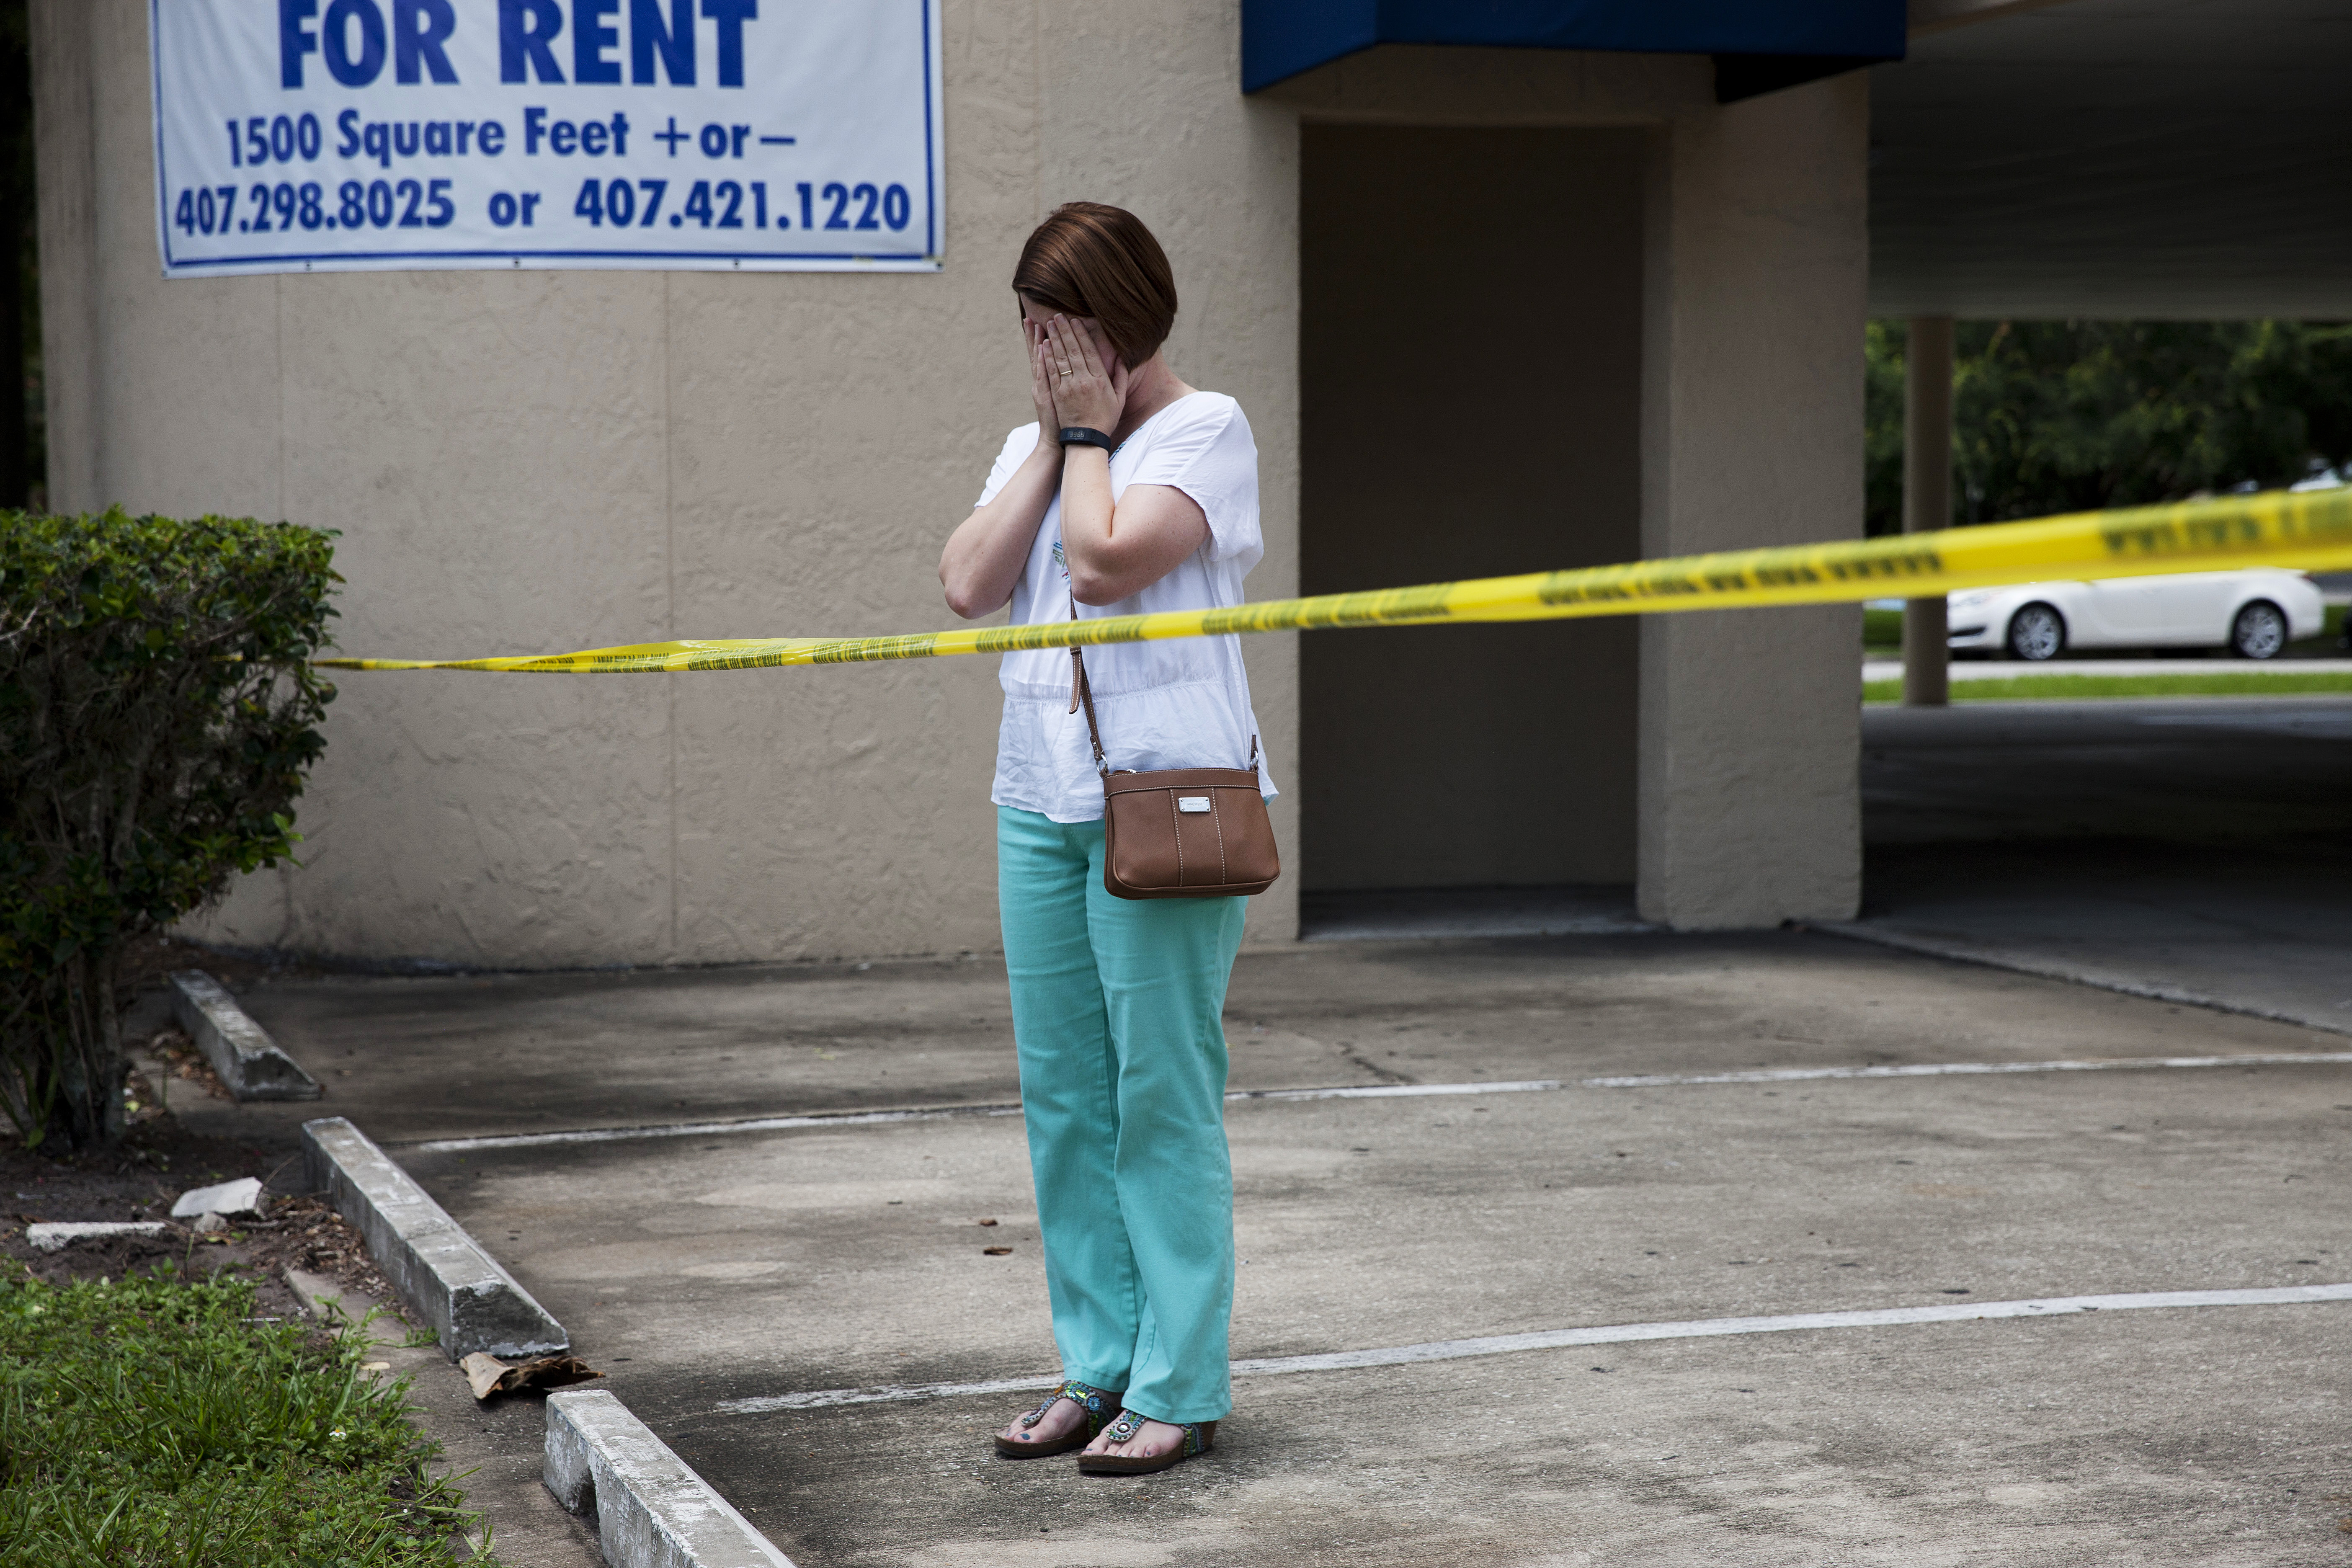 A woman reacts as authorities investigate Pulse following a mass shooting in Orlando, Fla., on June 12, 2016.